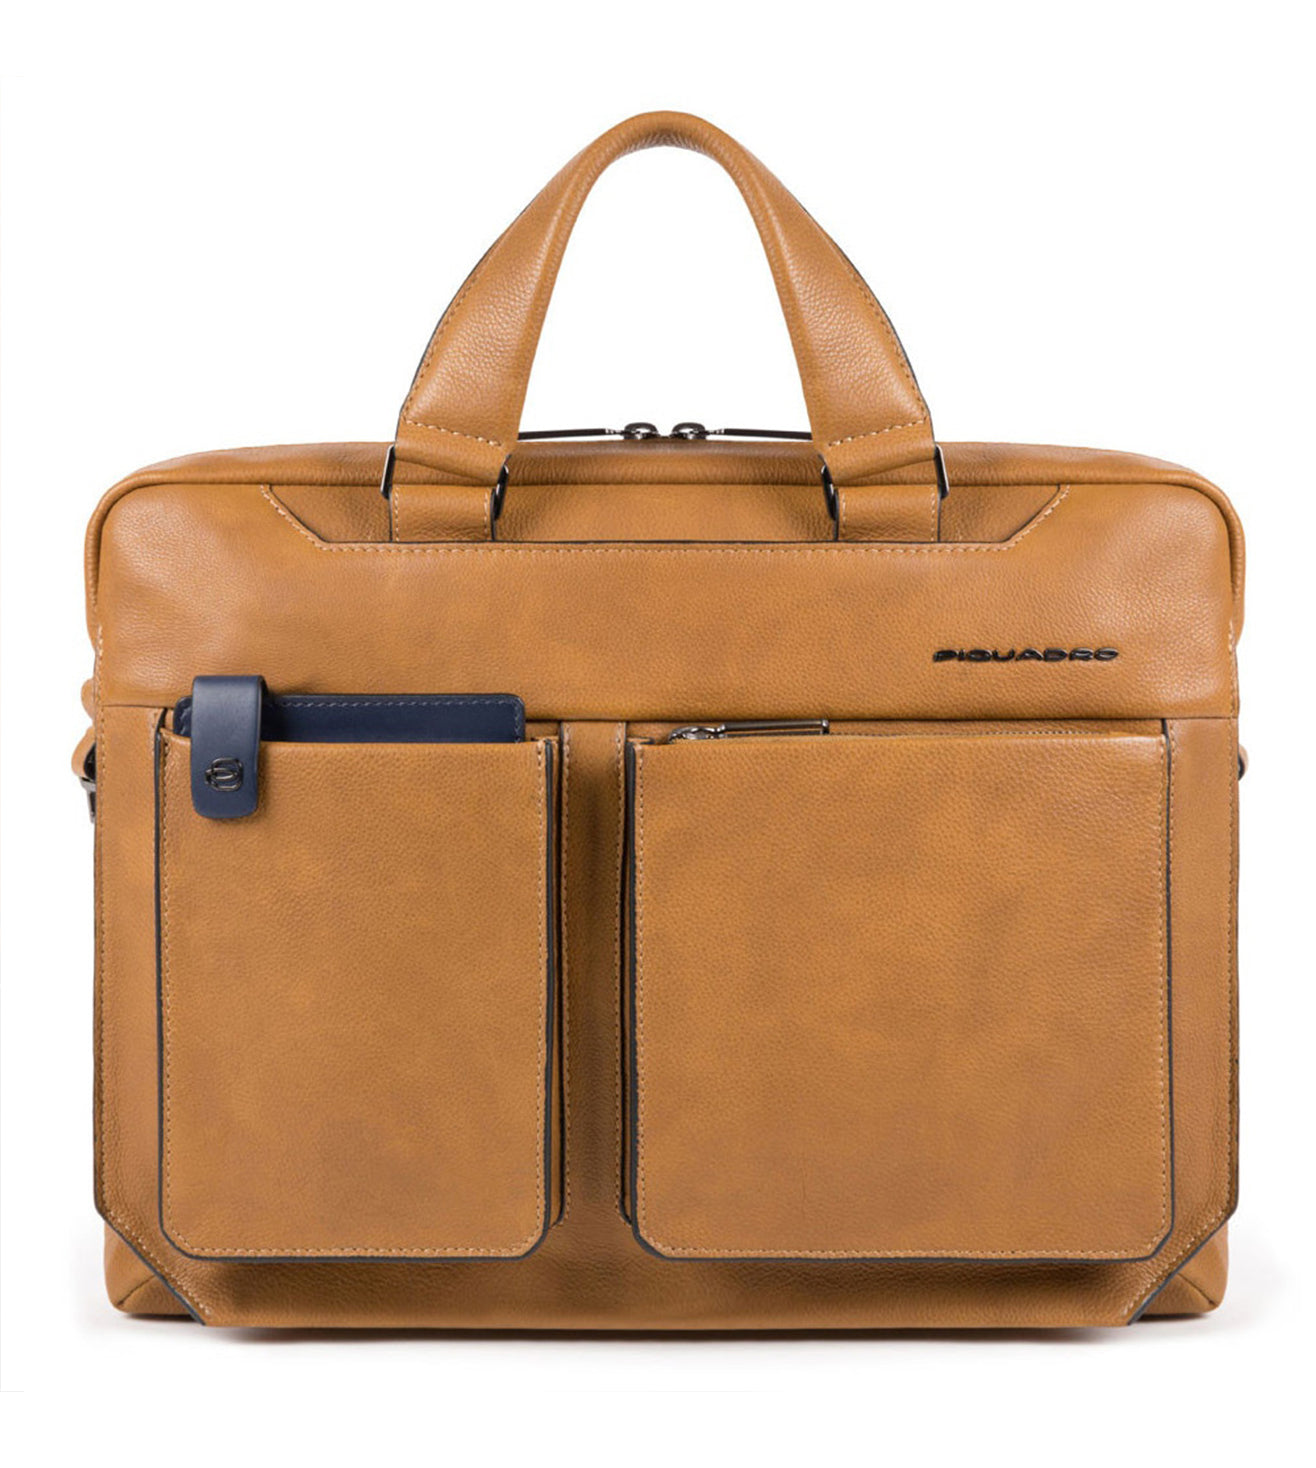 Piquadro Tallin Laptop Briefcase With Two Handles